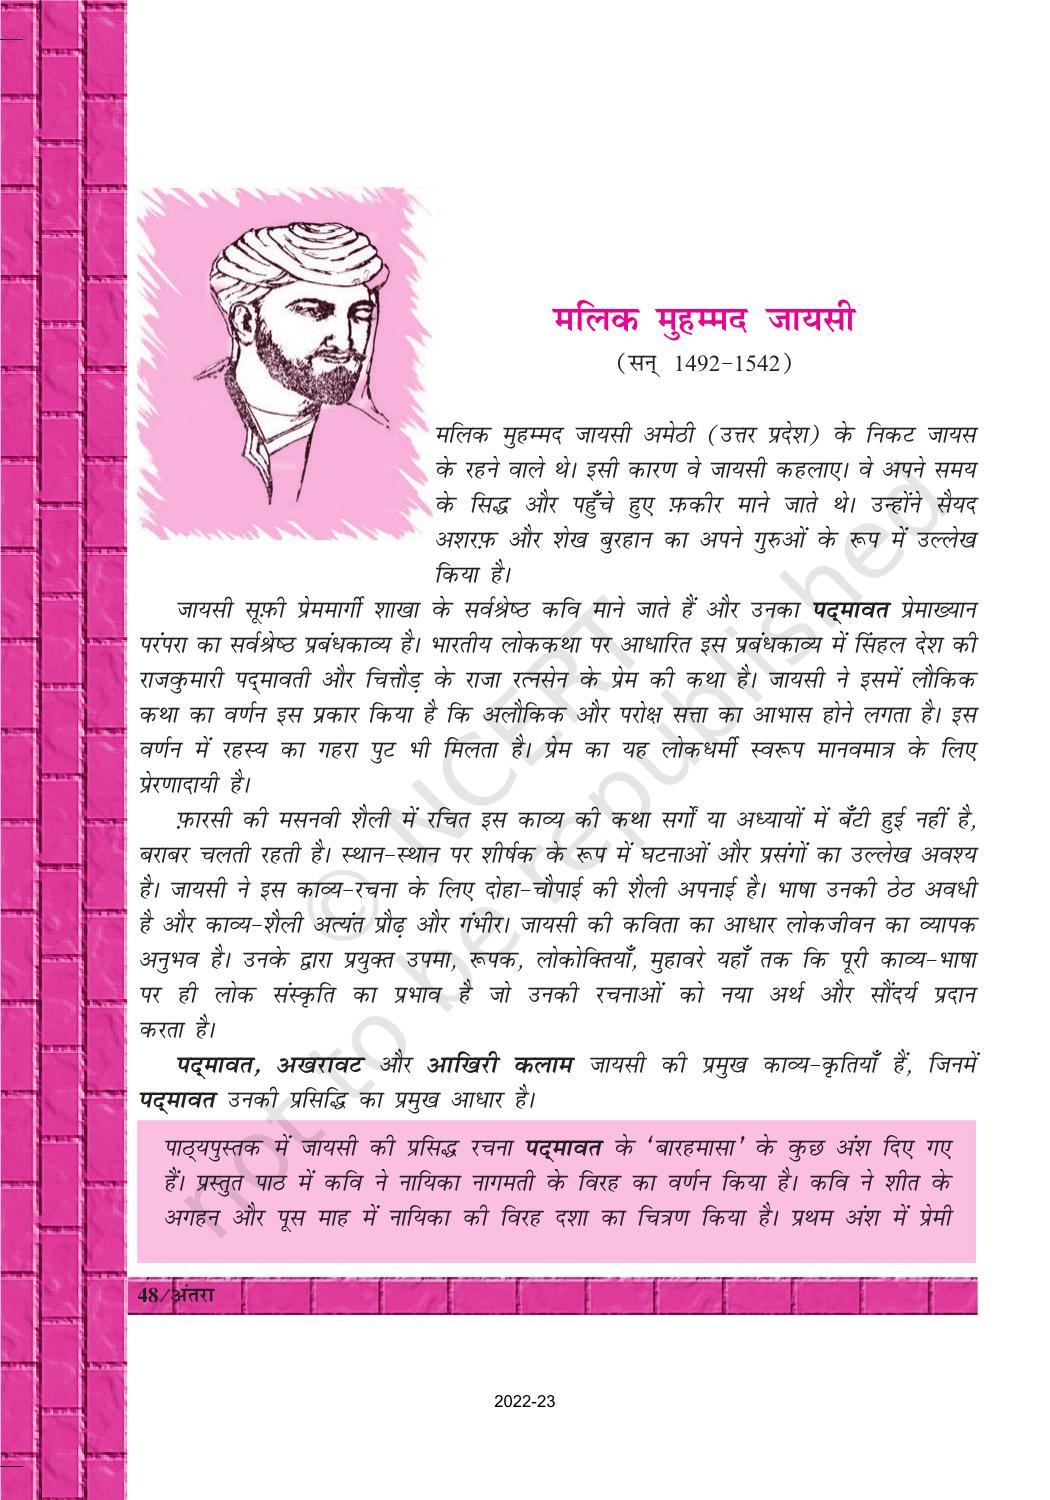 NCERT Book for Class 12 Hindi Antra Chapter 8 मलिक मुहम्मद जायसी - Page 1